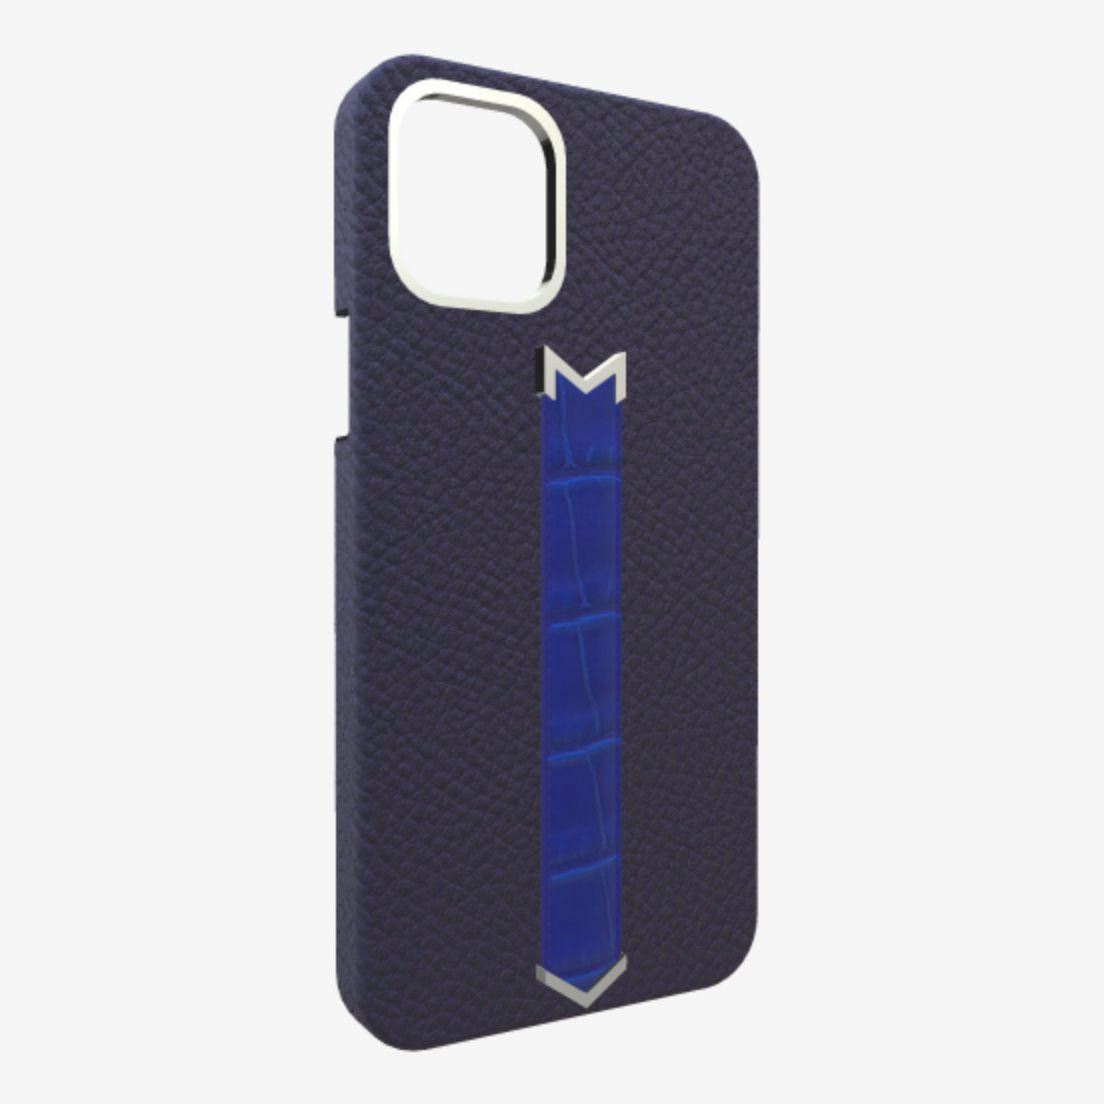 Silver Finger Strap Case for iPhone 13 Pro in Genuine Calfskin and Alligator Navy-Blue Electric-Blue 